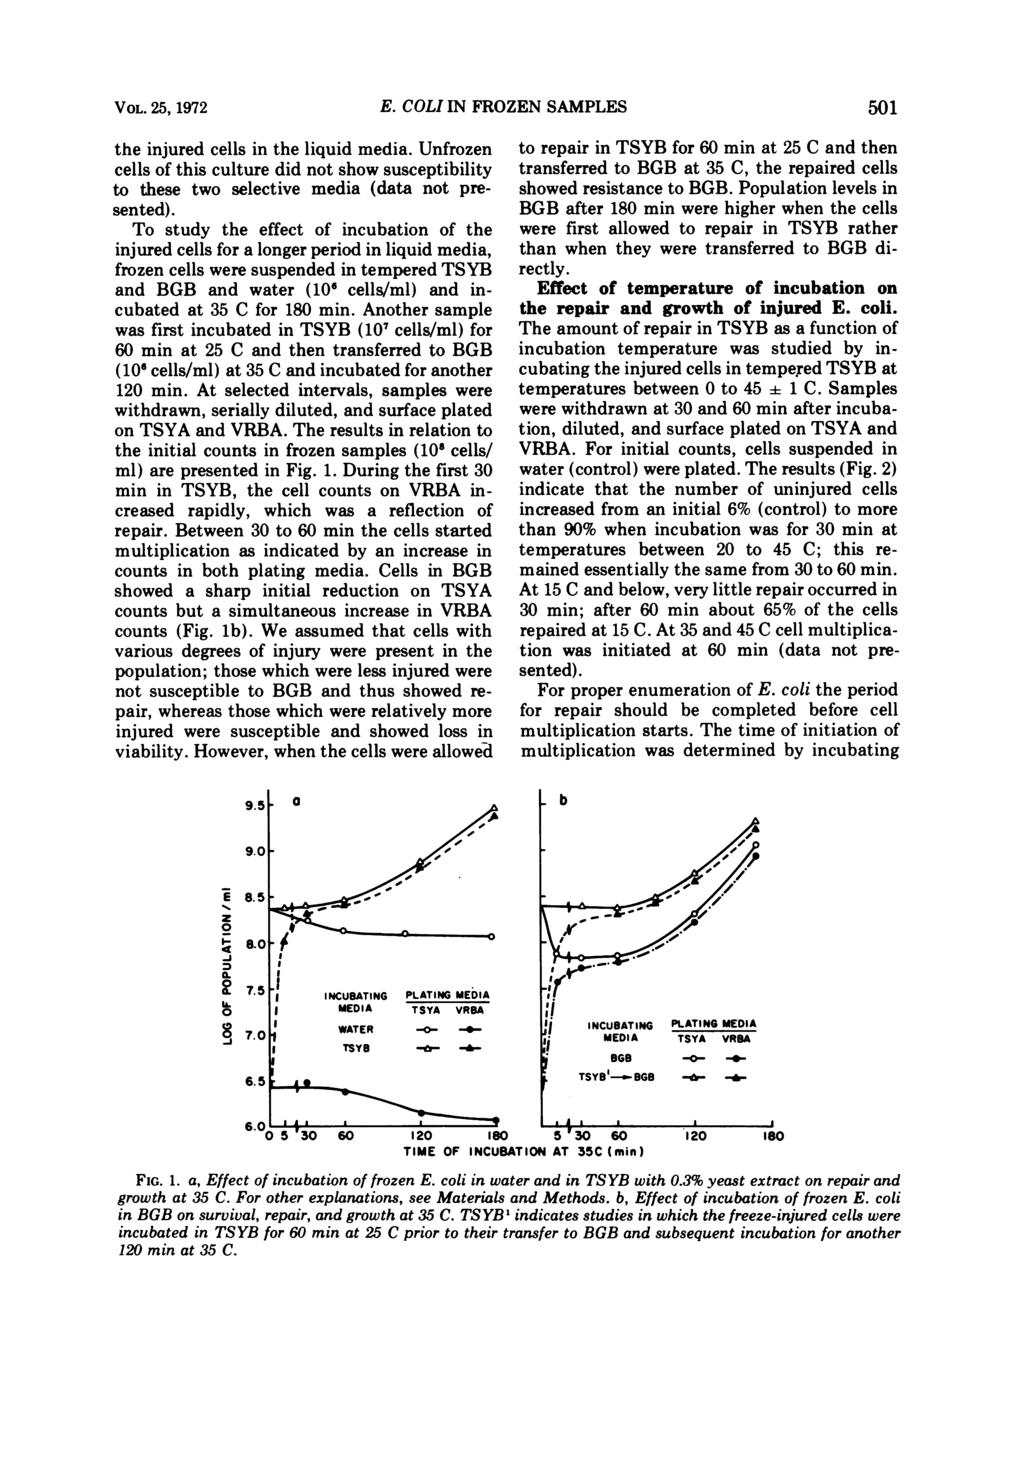 VOL. 25, 1972 E. COLI IN FROZEN SAMPLES 51 the injured cells in the liquid media. Unfroen cells of this culture did not show susceptibility to these two selective media (data not presented).